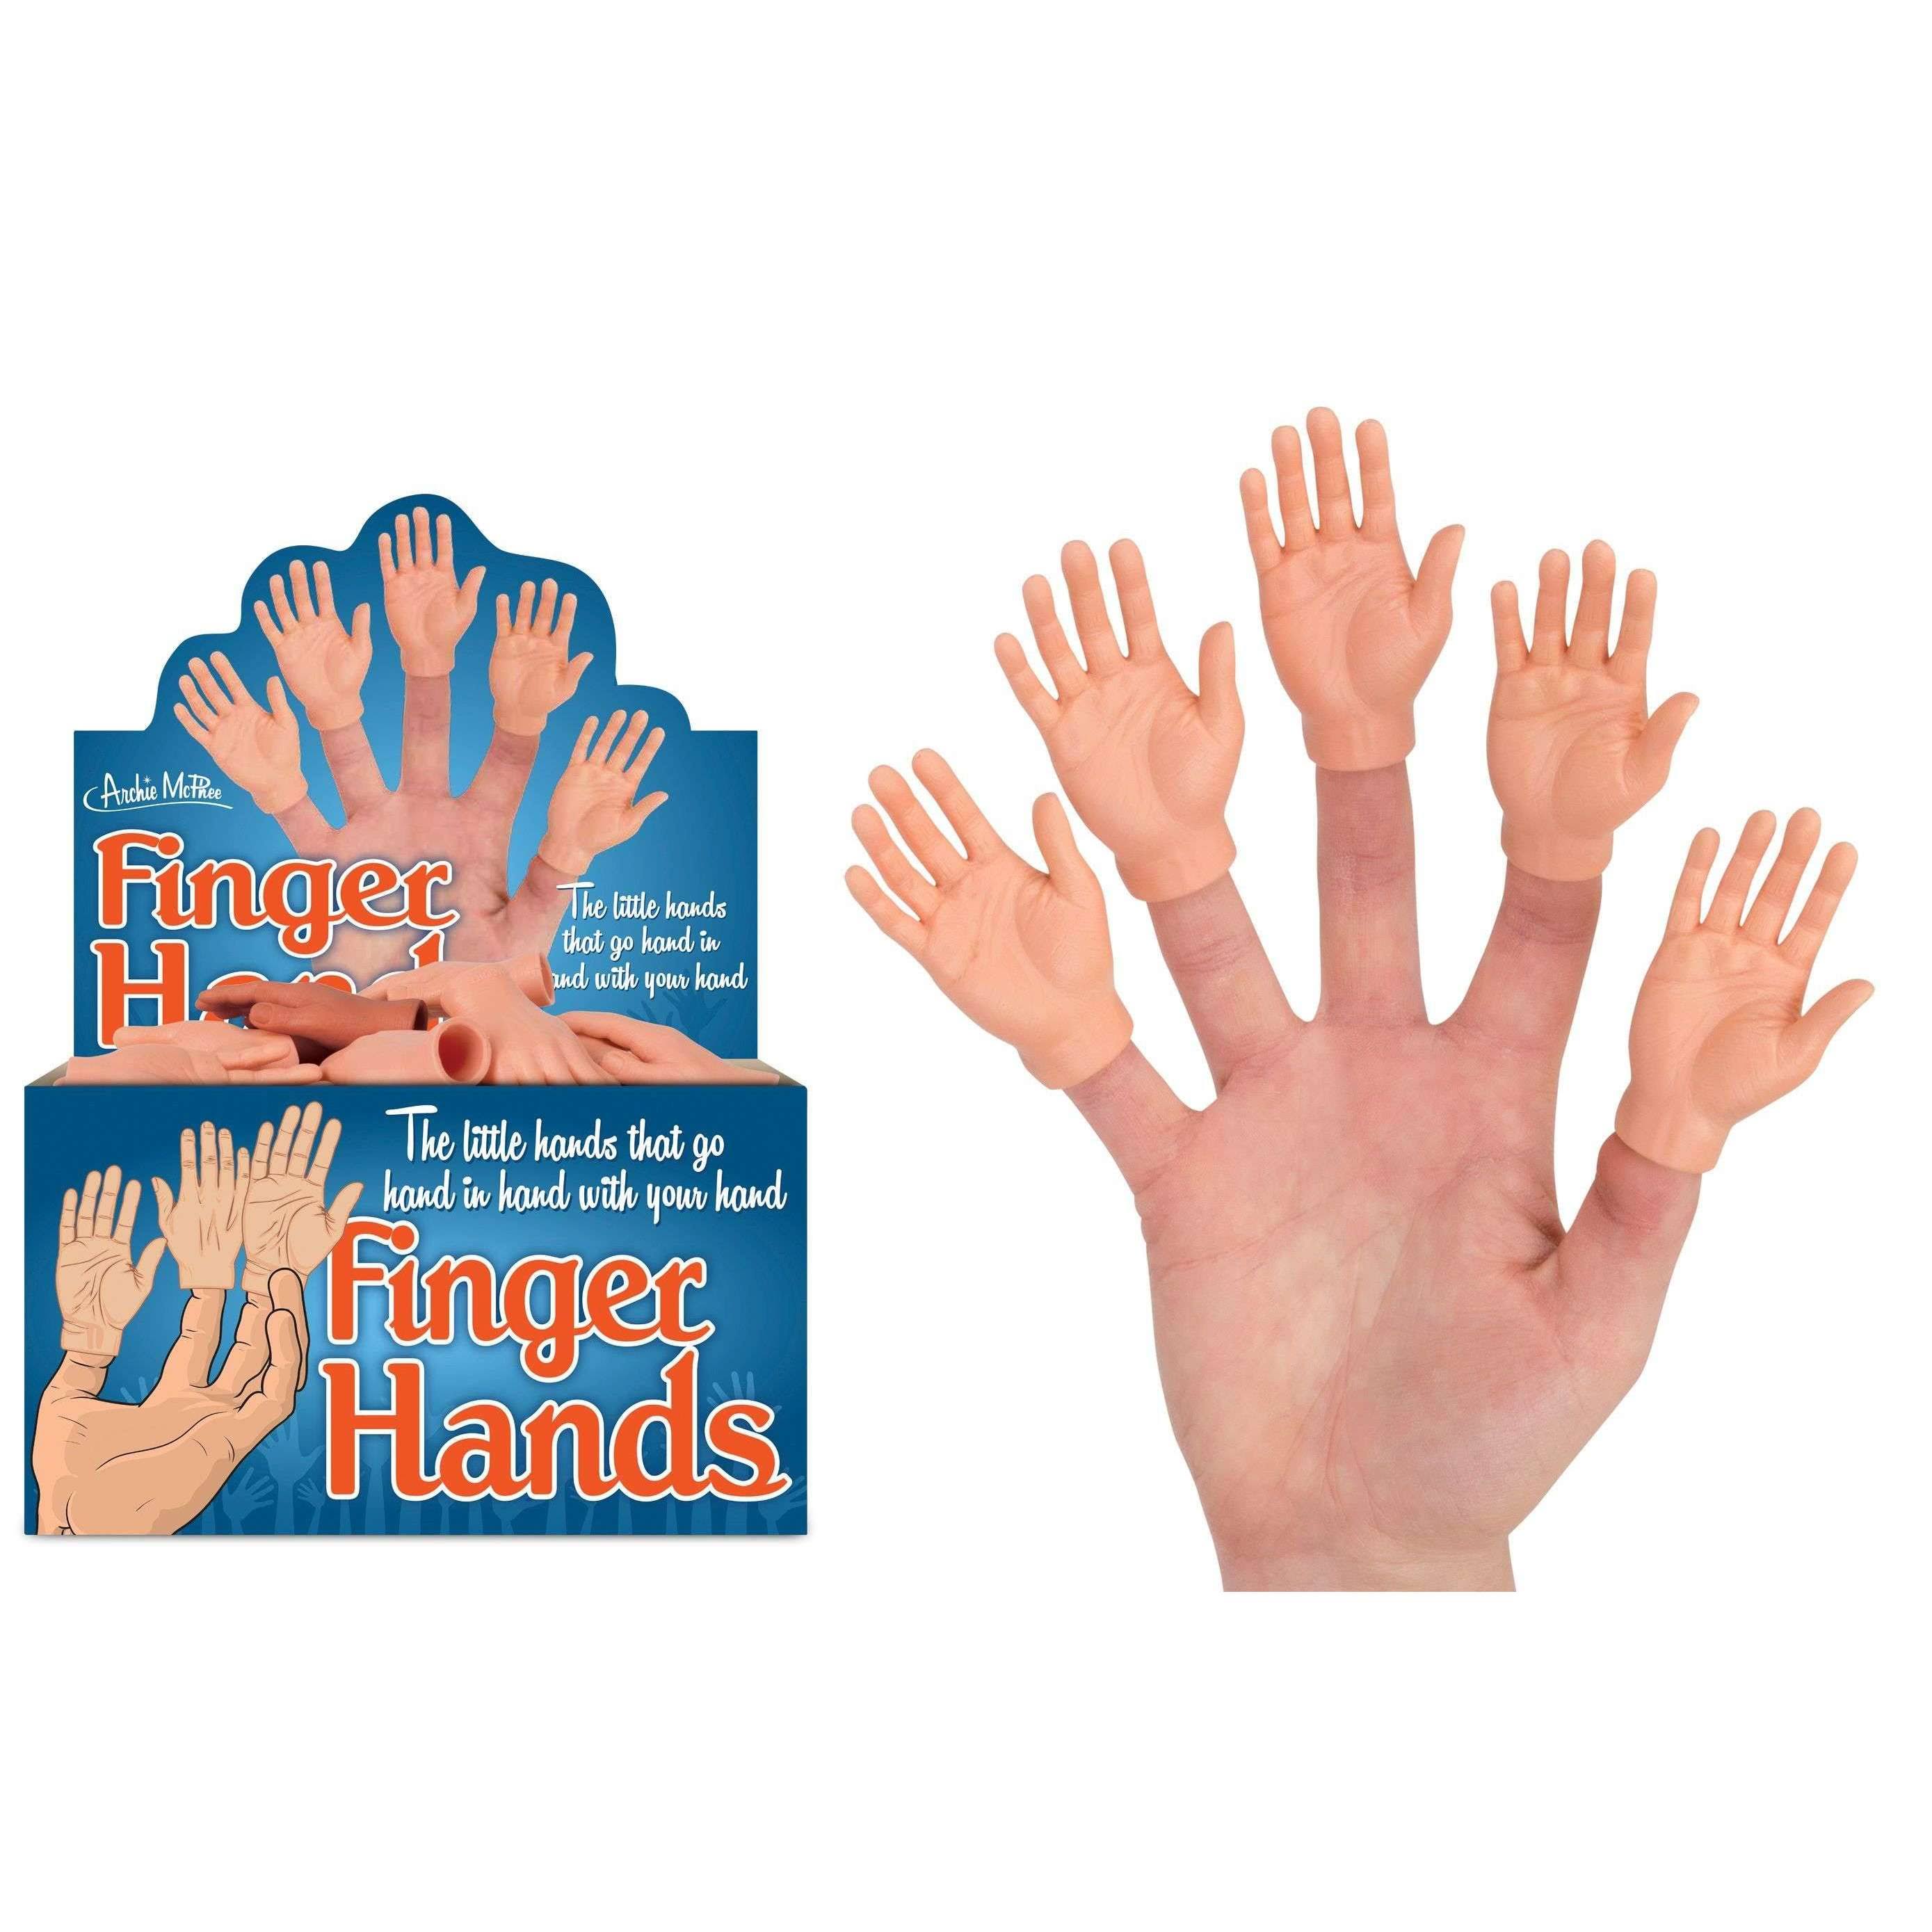 Accoutrements Hand Finger Puppets Toy - 5pk